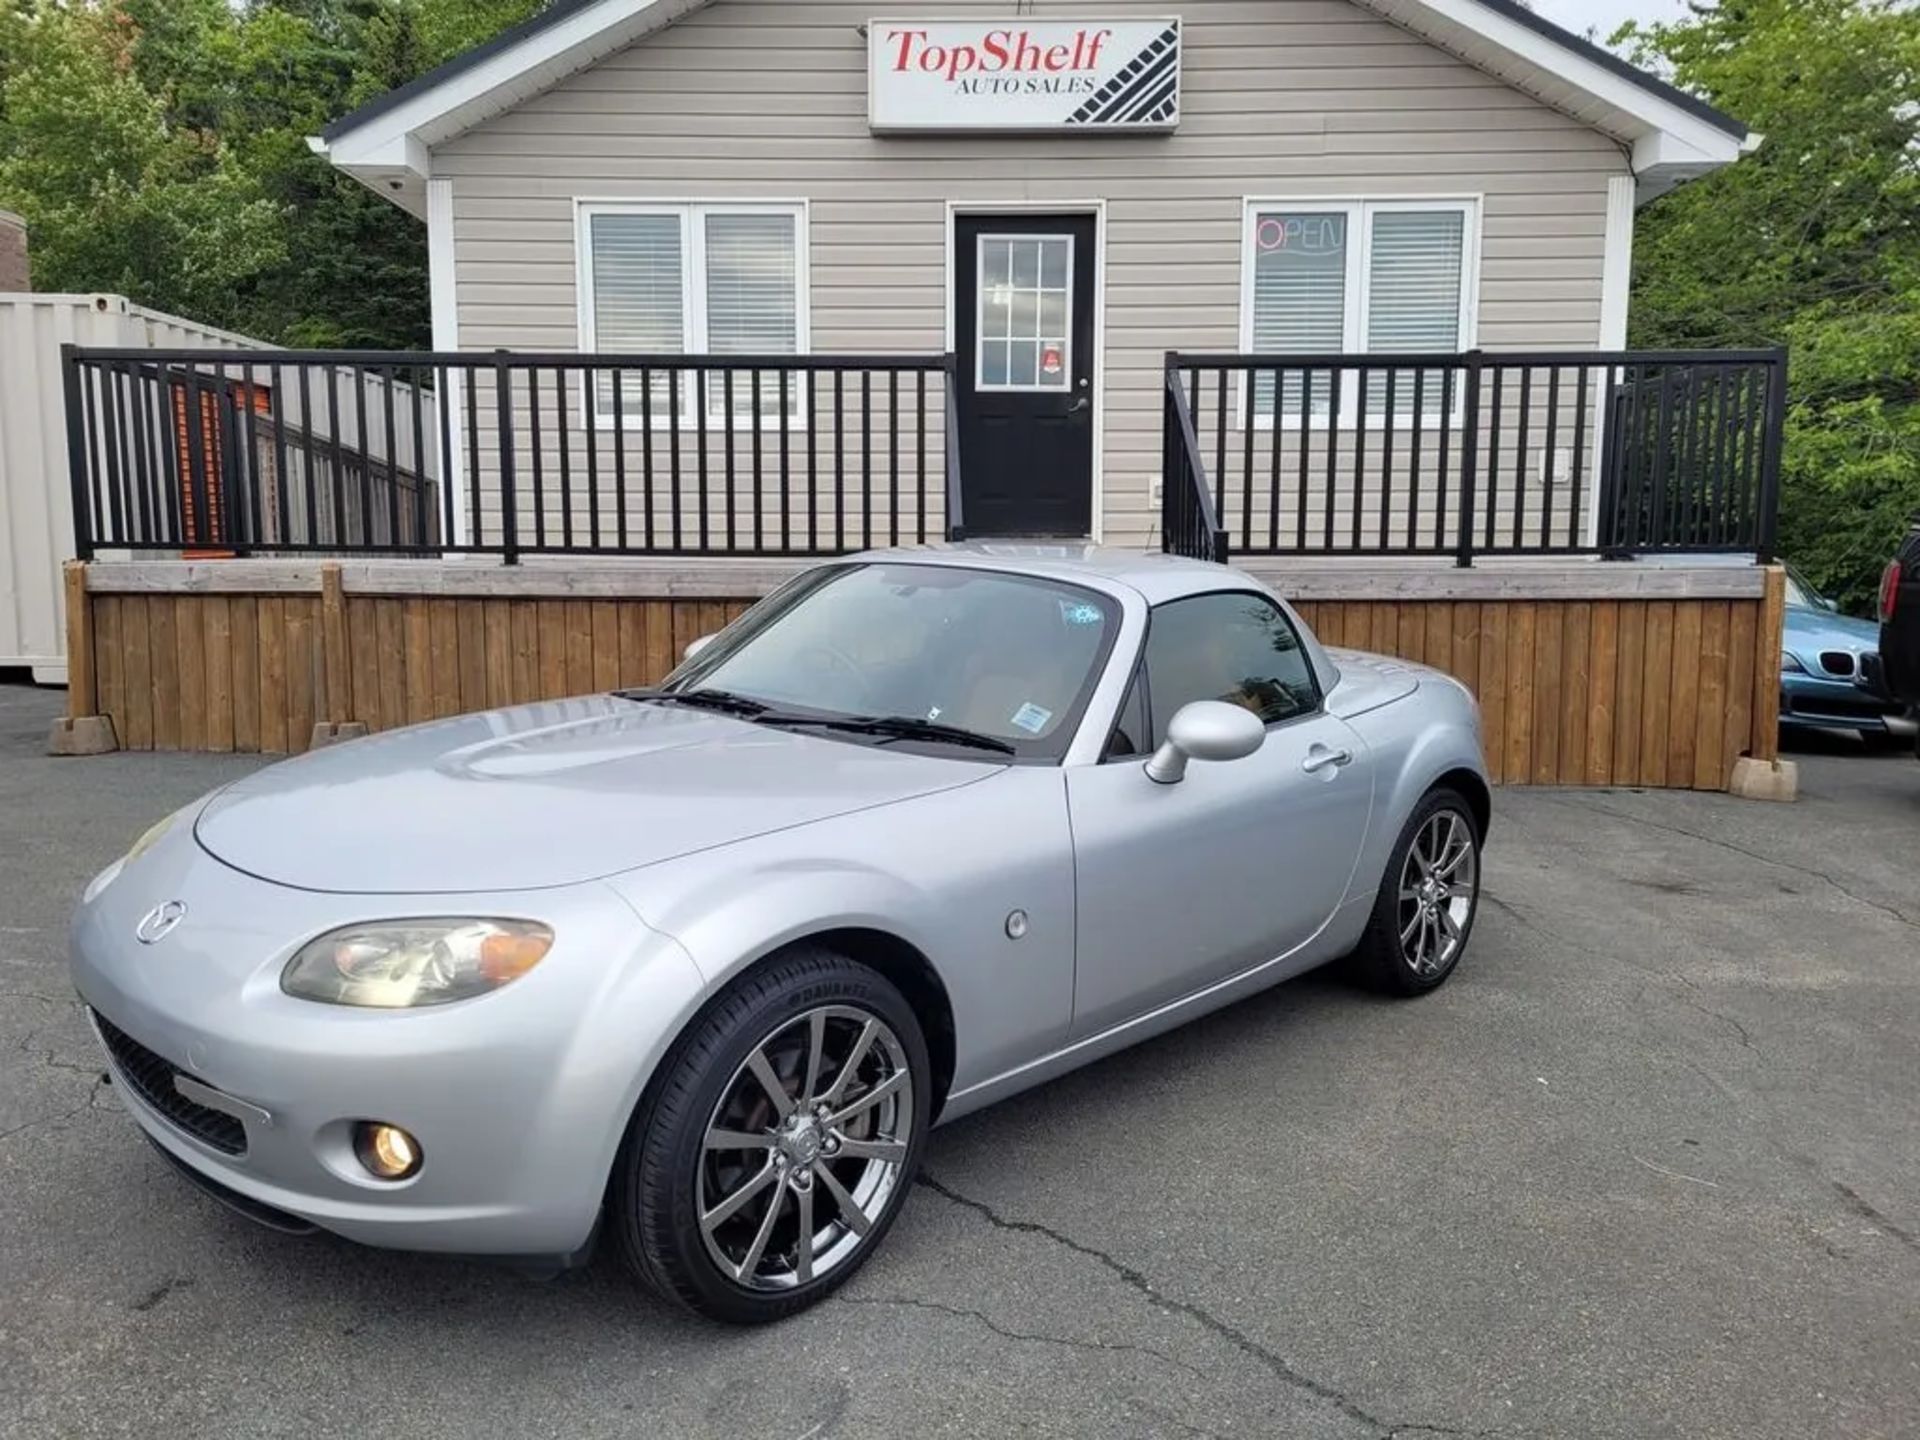 2007 Mazda MX-5 Roadster Freshly Imported From Tokyo Japan. - Image 15 of 20